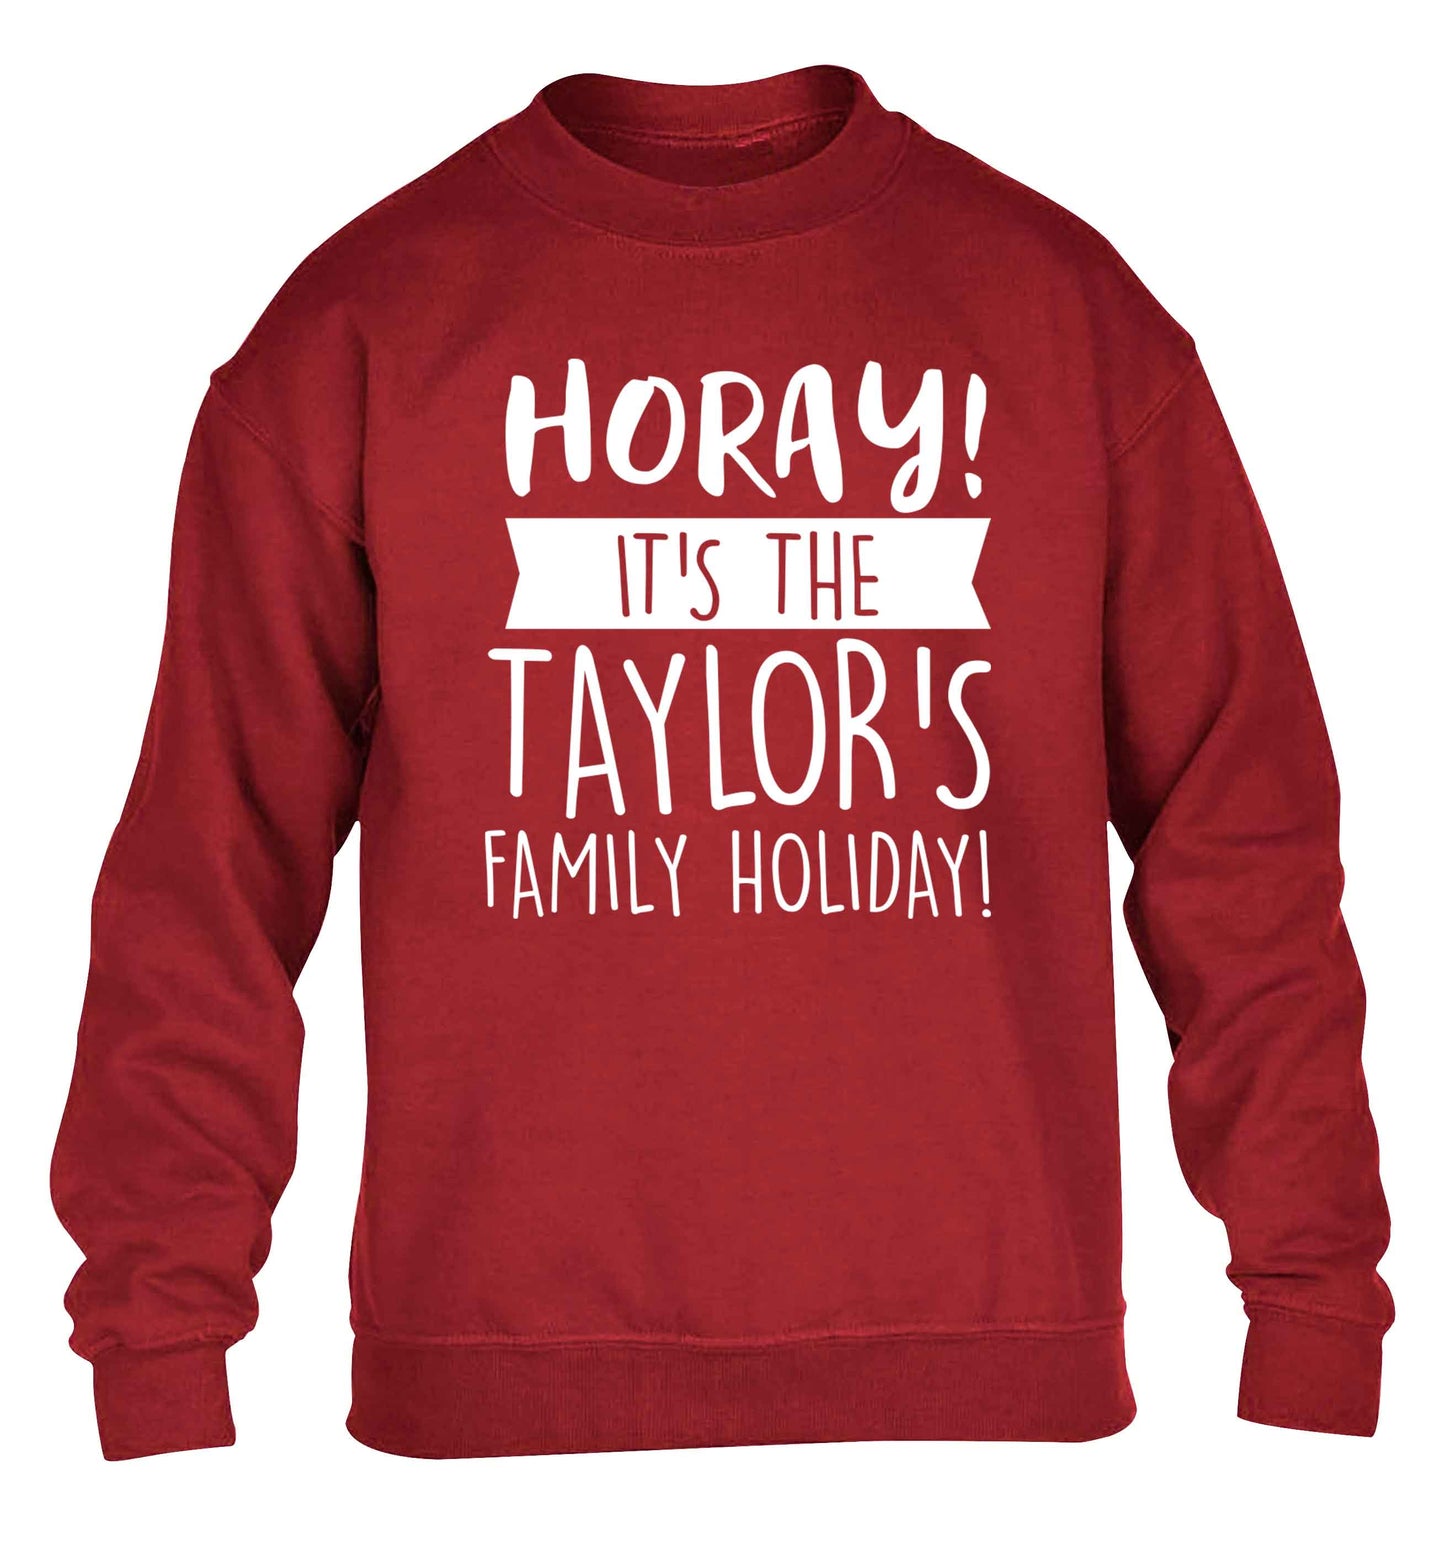 Horay it's the Taylor's family holiday! personalised item children's grey sweater 12-13 Years